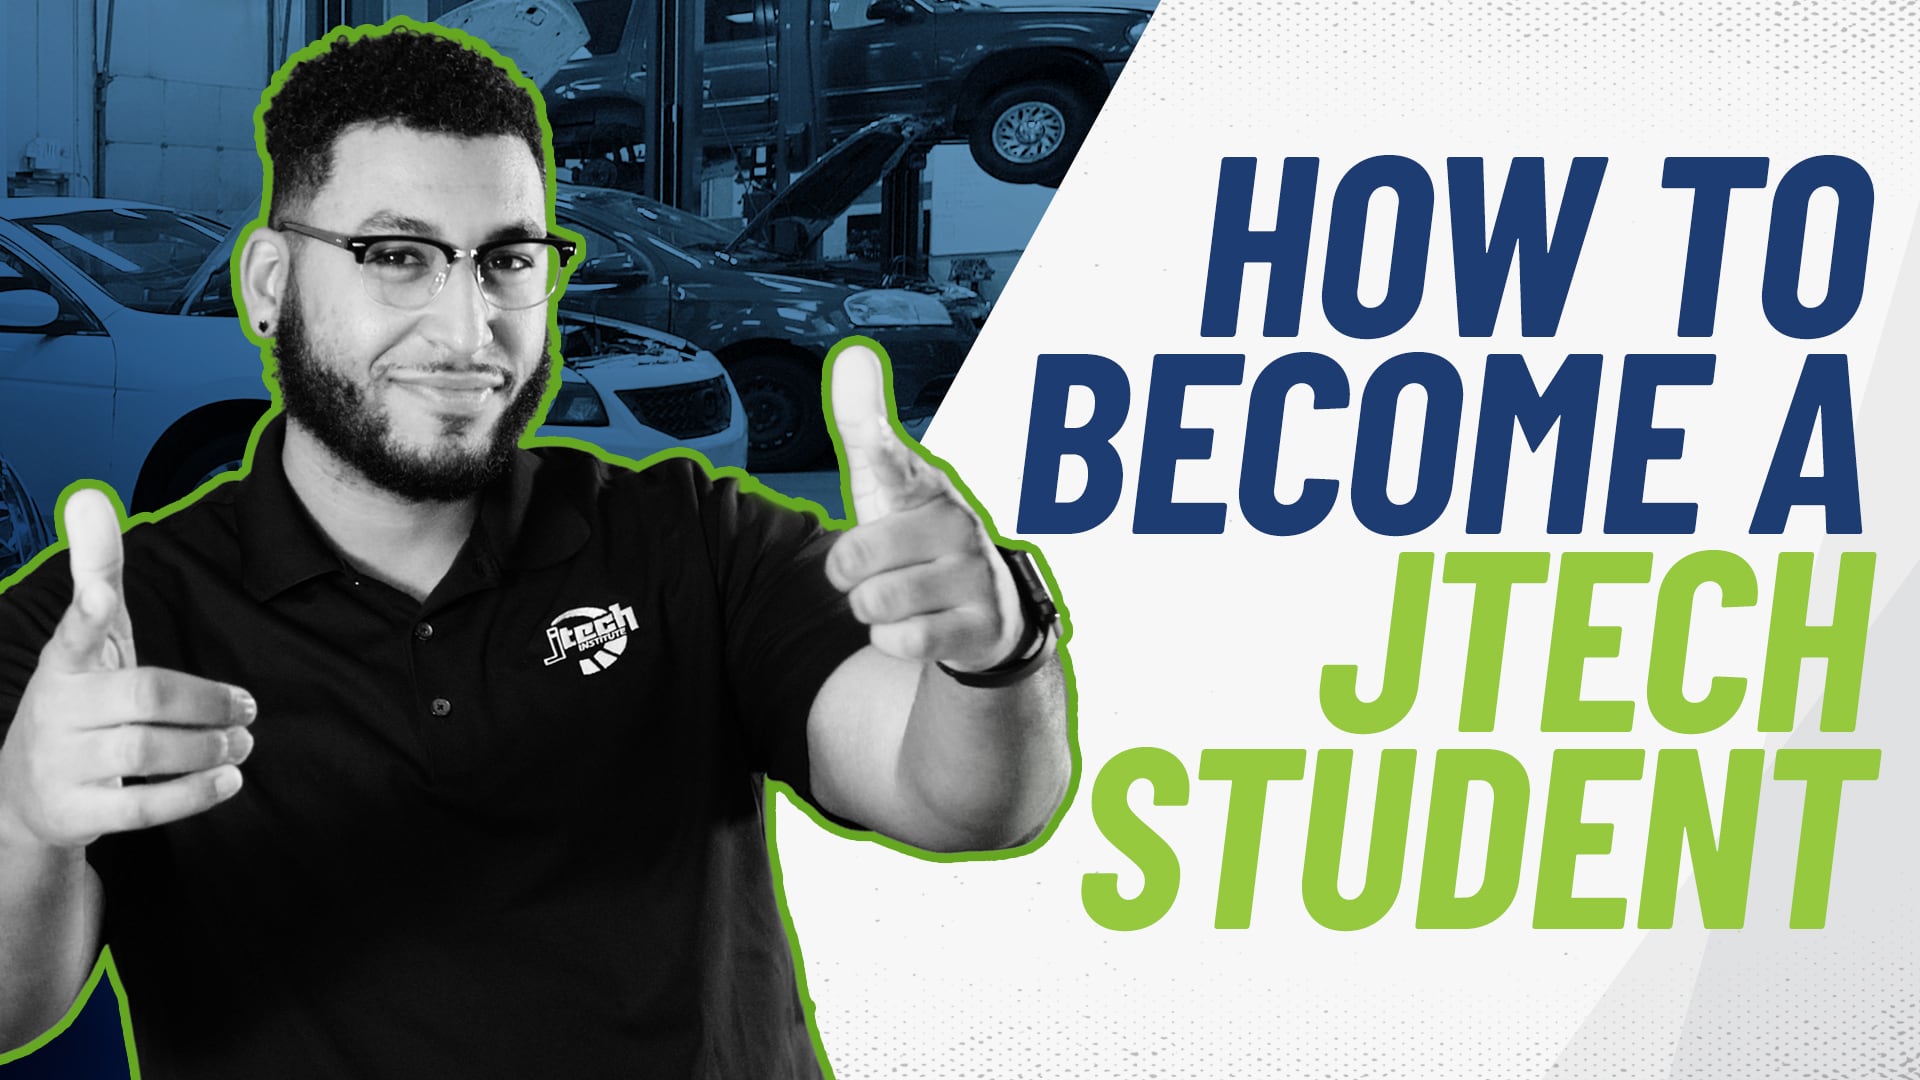 J-Tech How to become a J-Tech student video